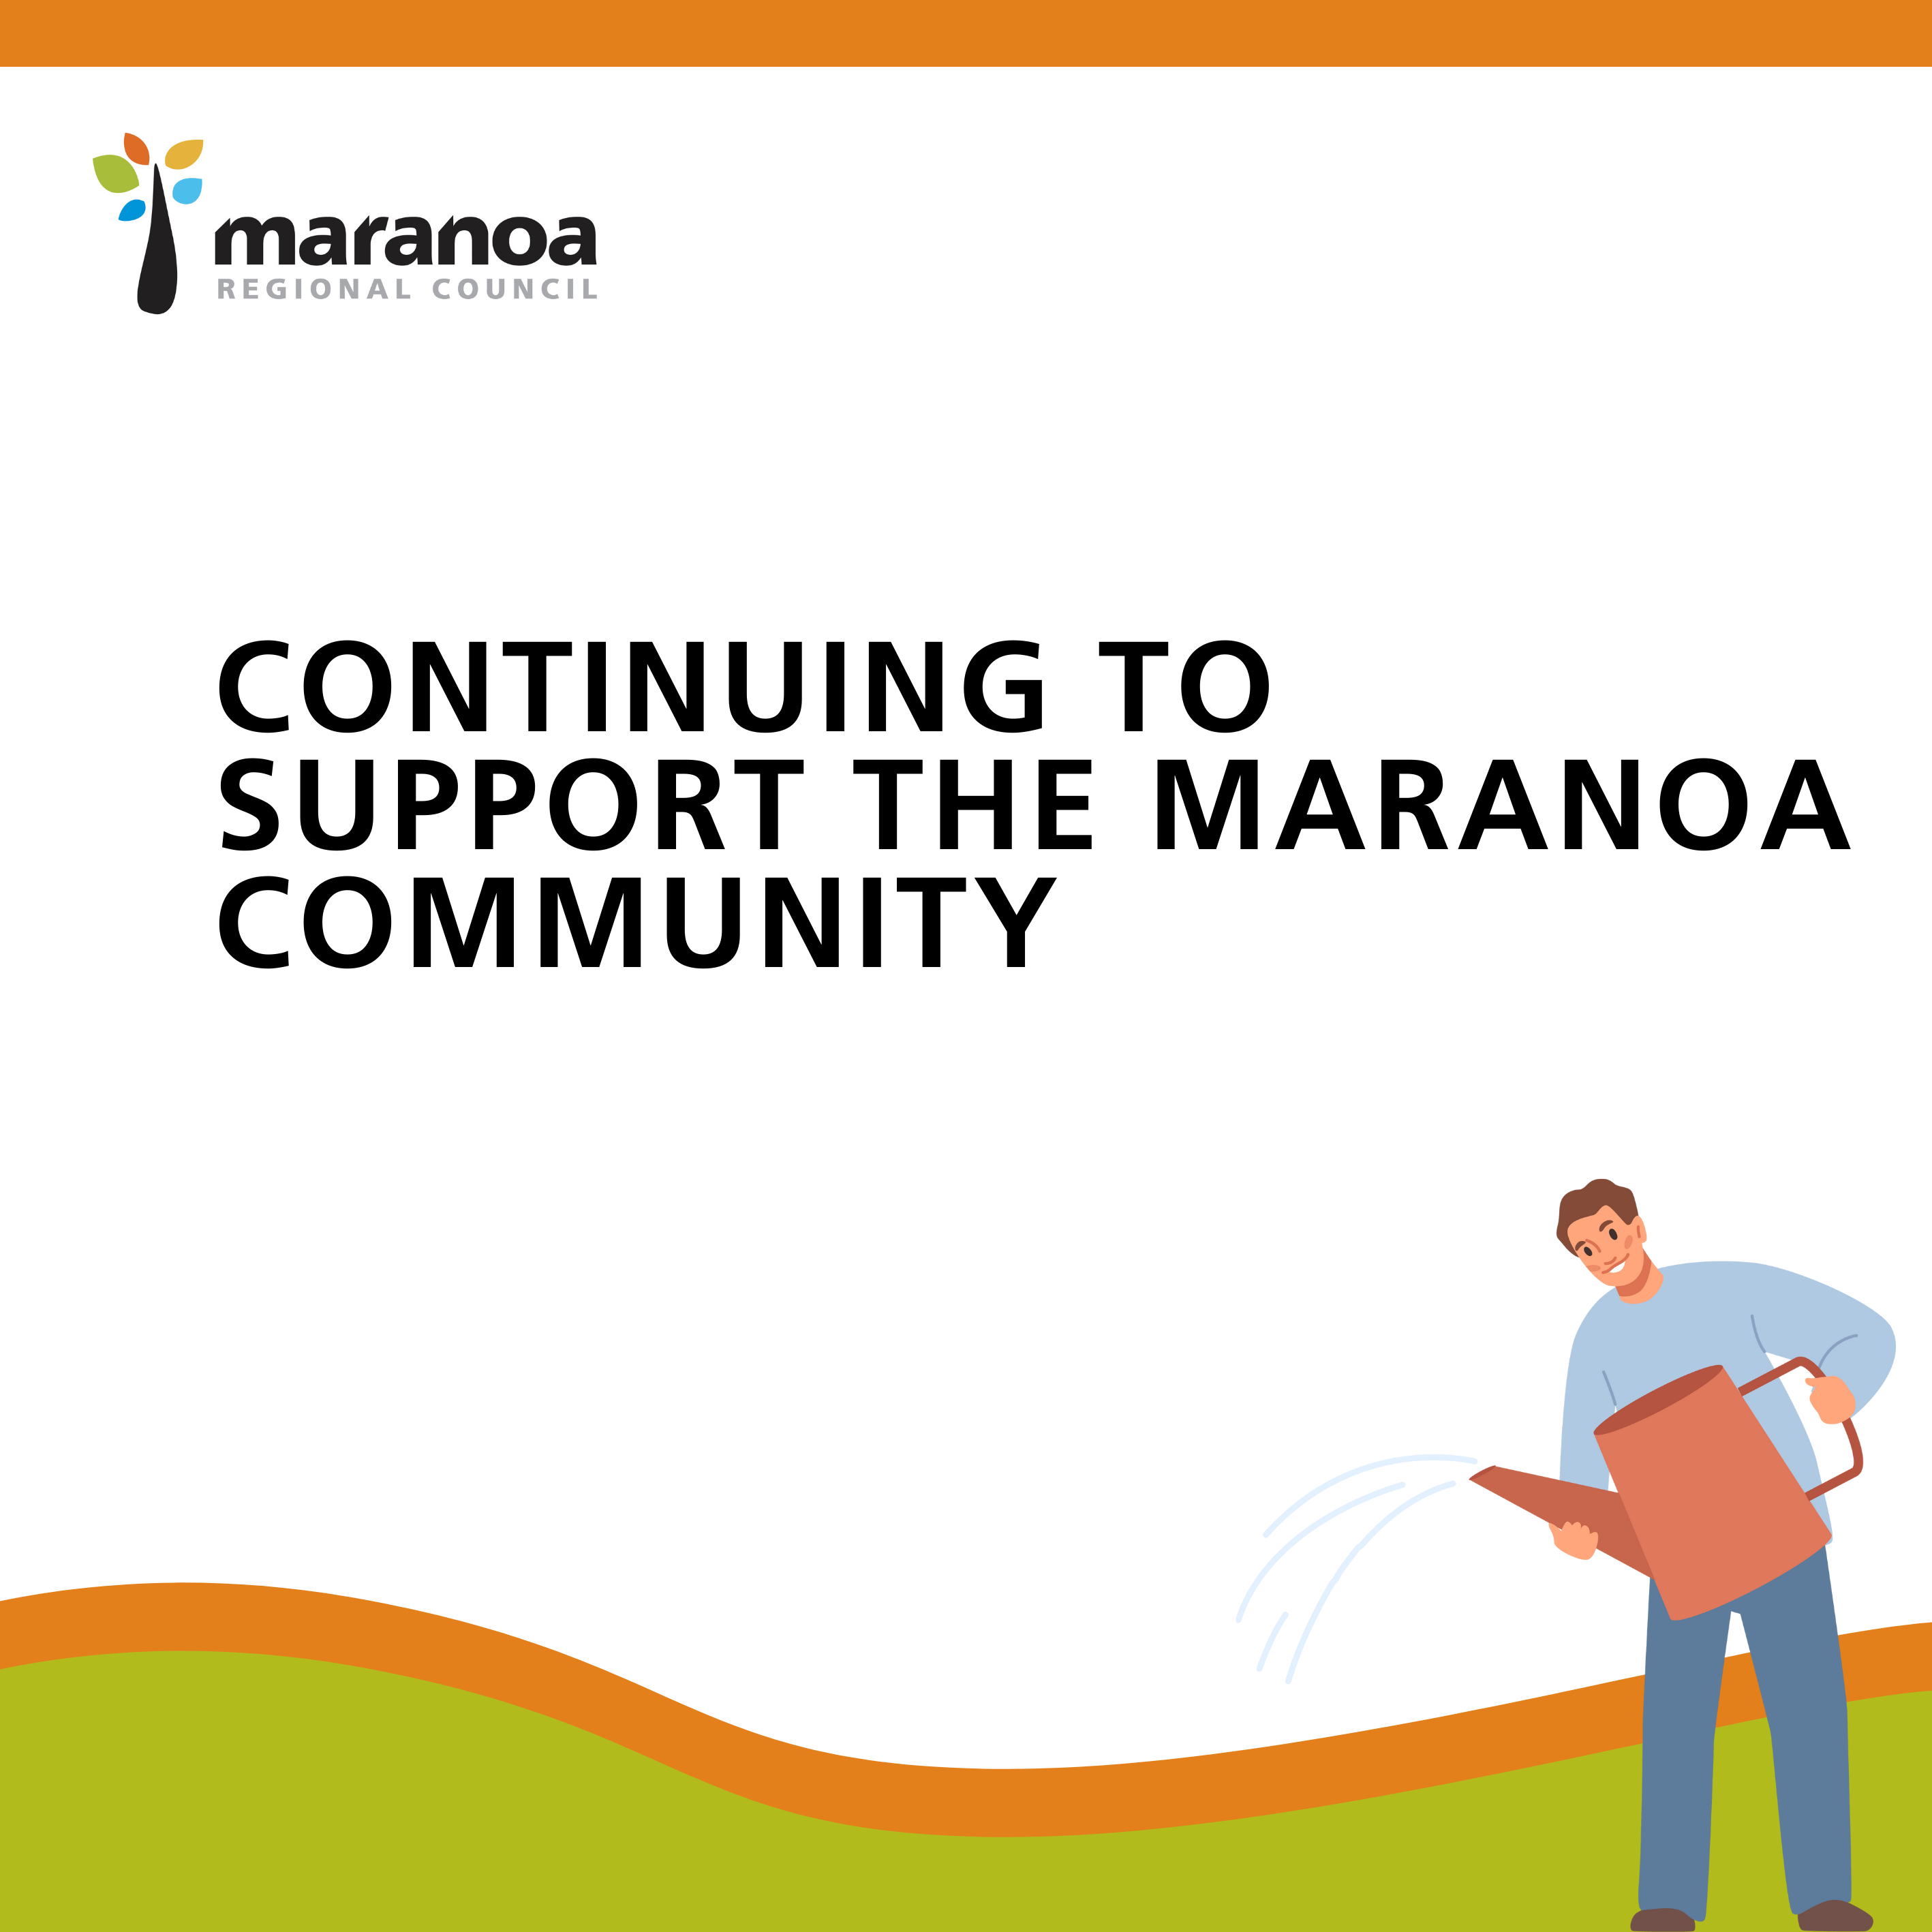 Continuing to support the Maranoa community